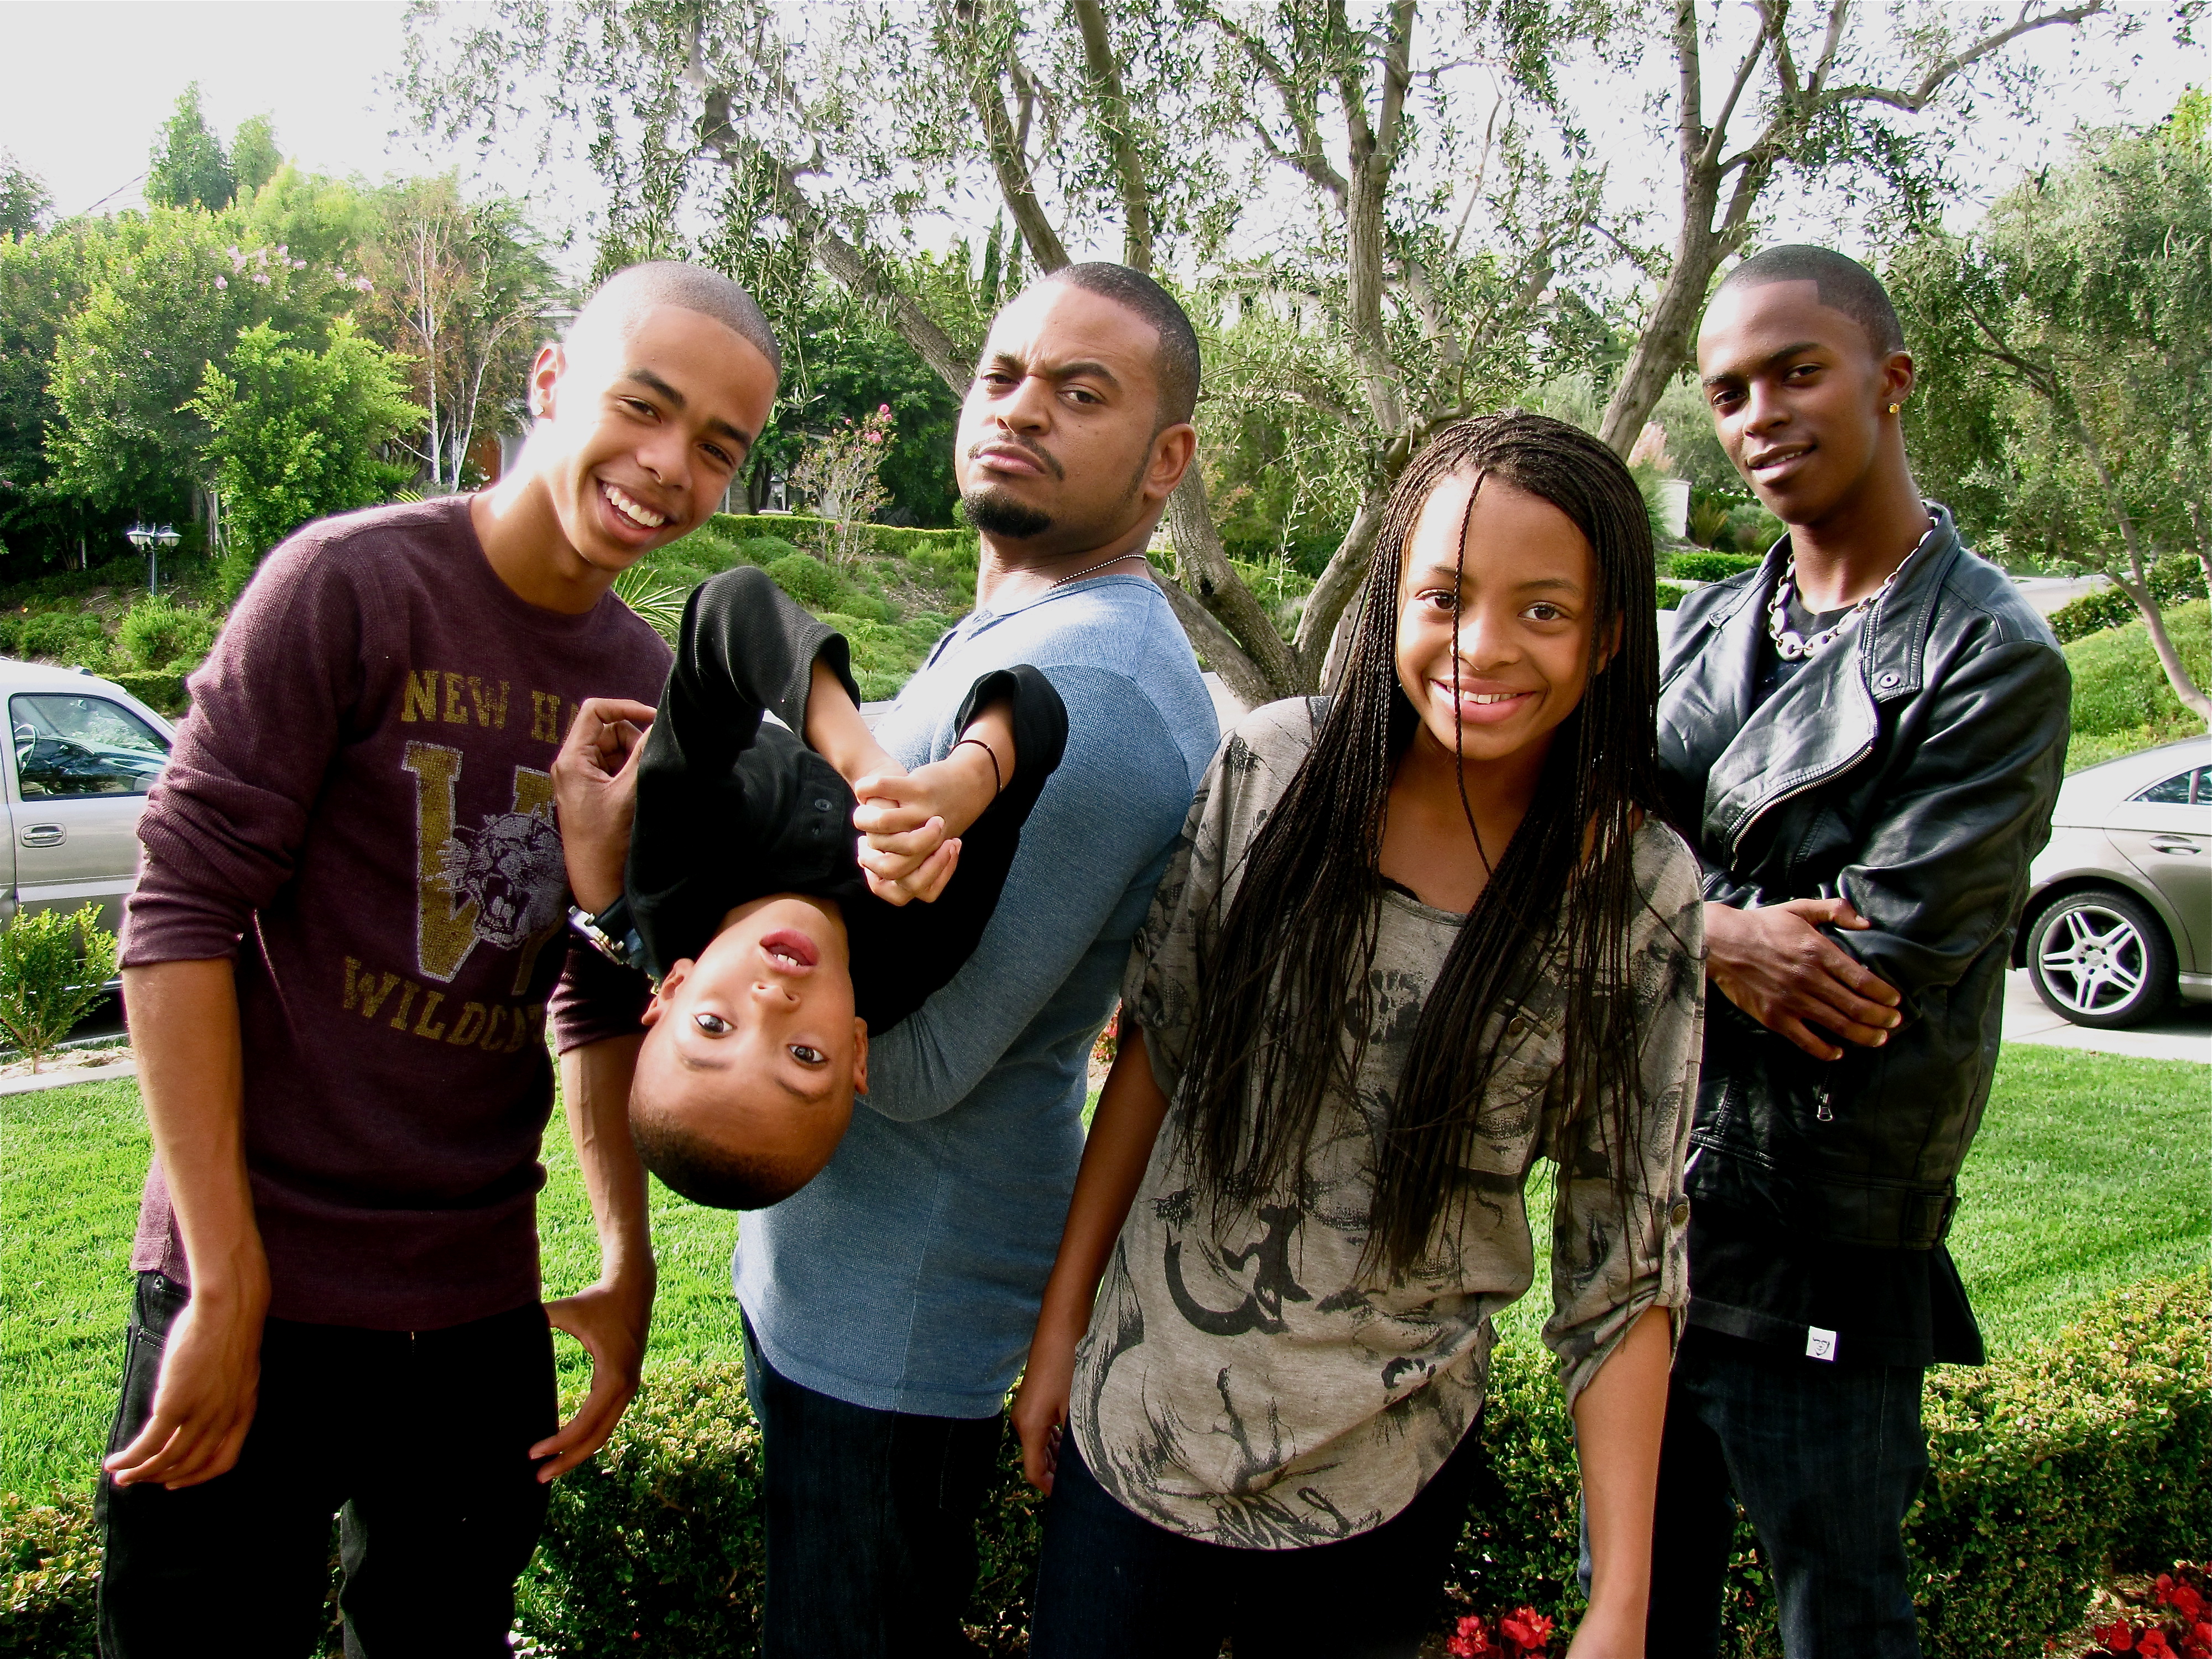 Chris Stokes with his four children. From left Miko, Stinky, Chris Stokes, Chrissy and Milo.